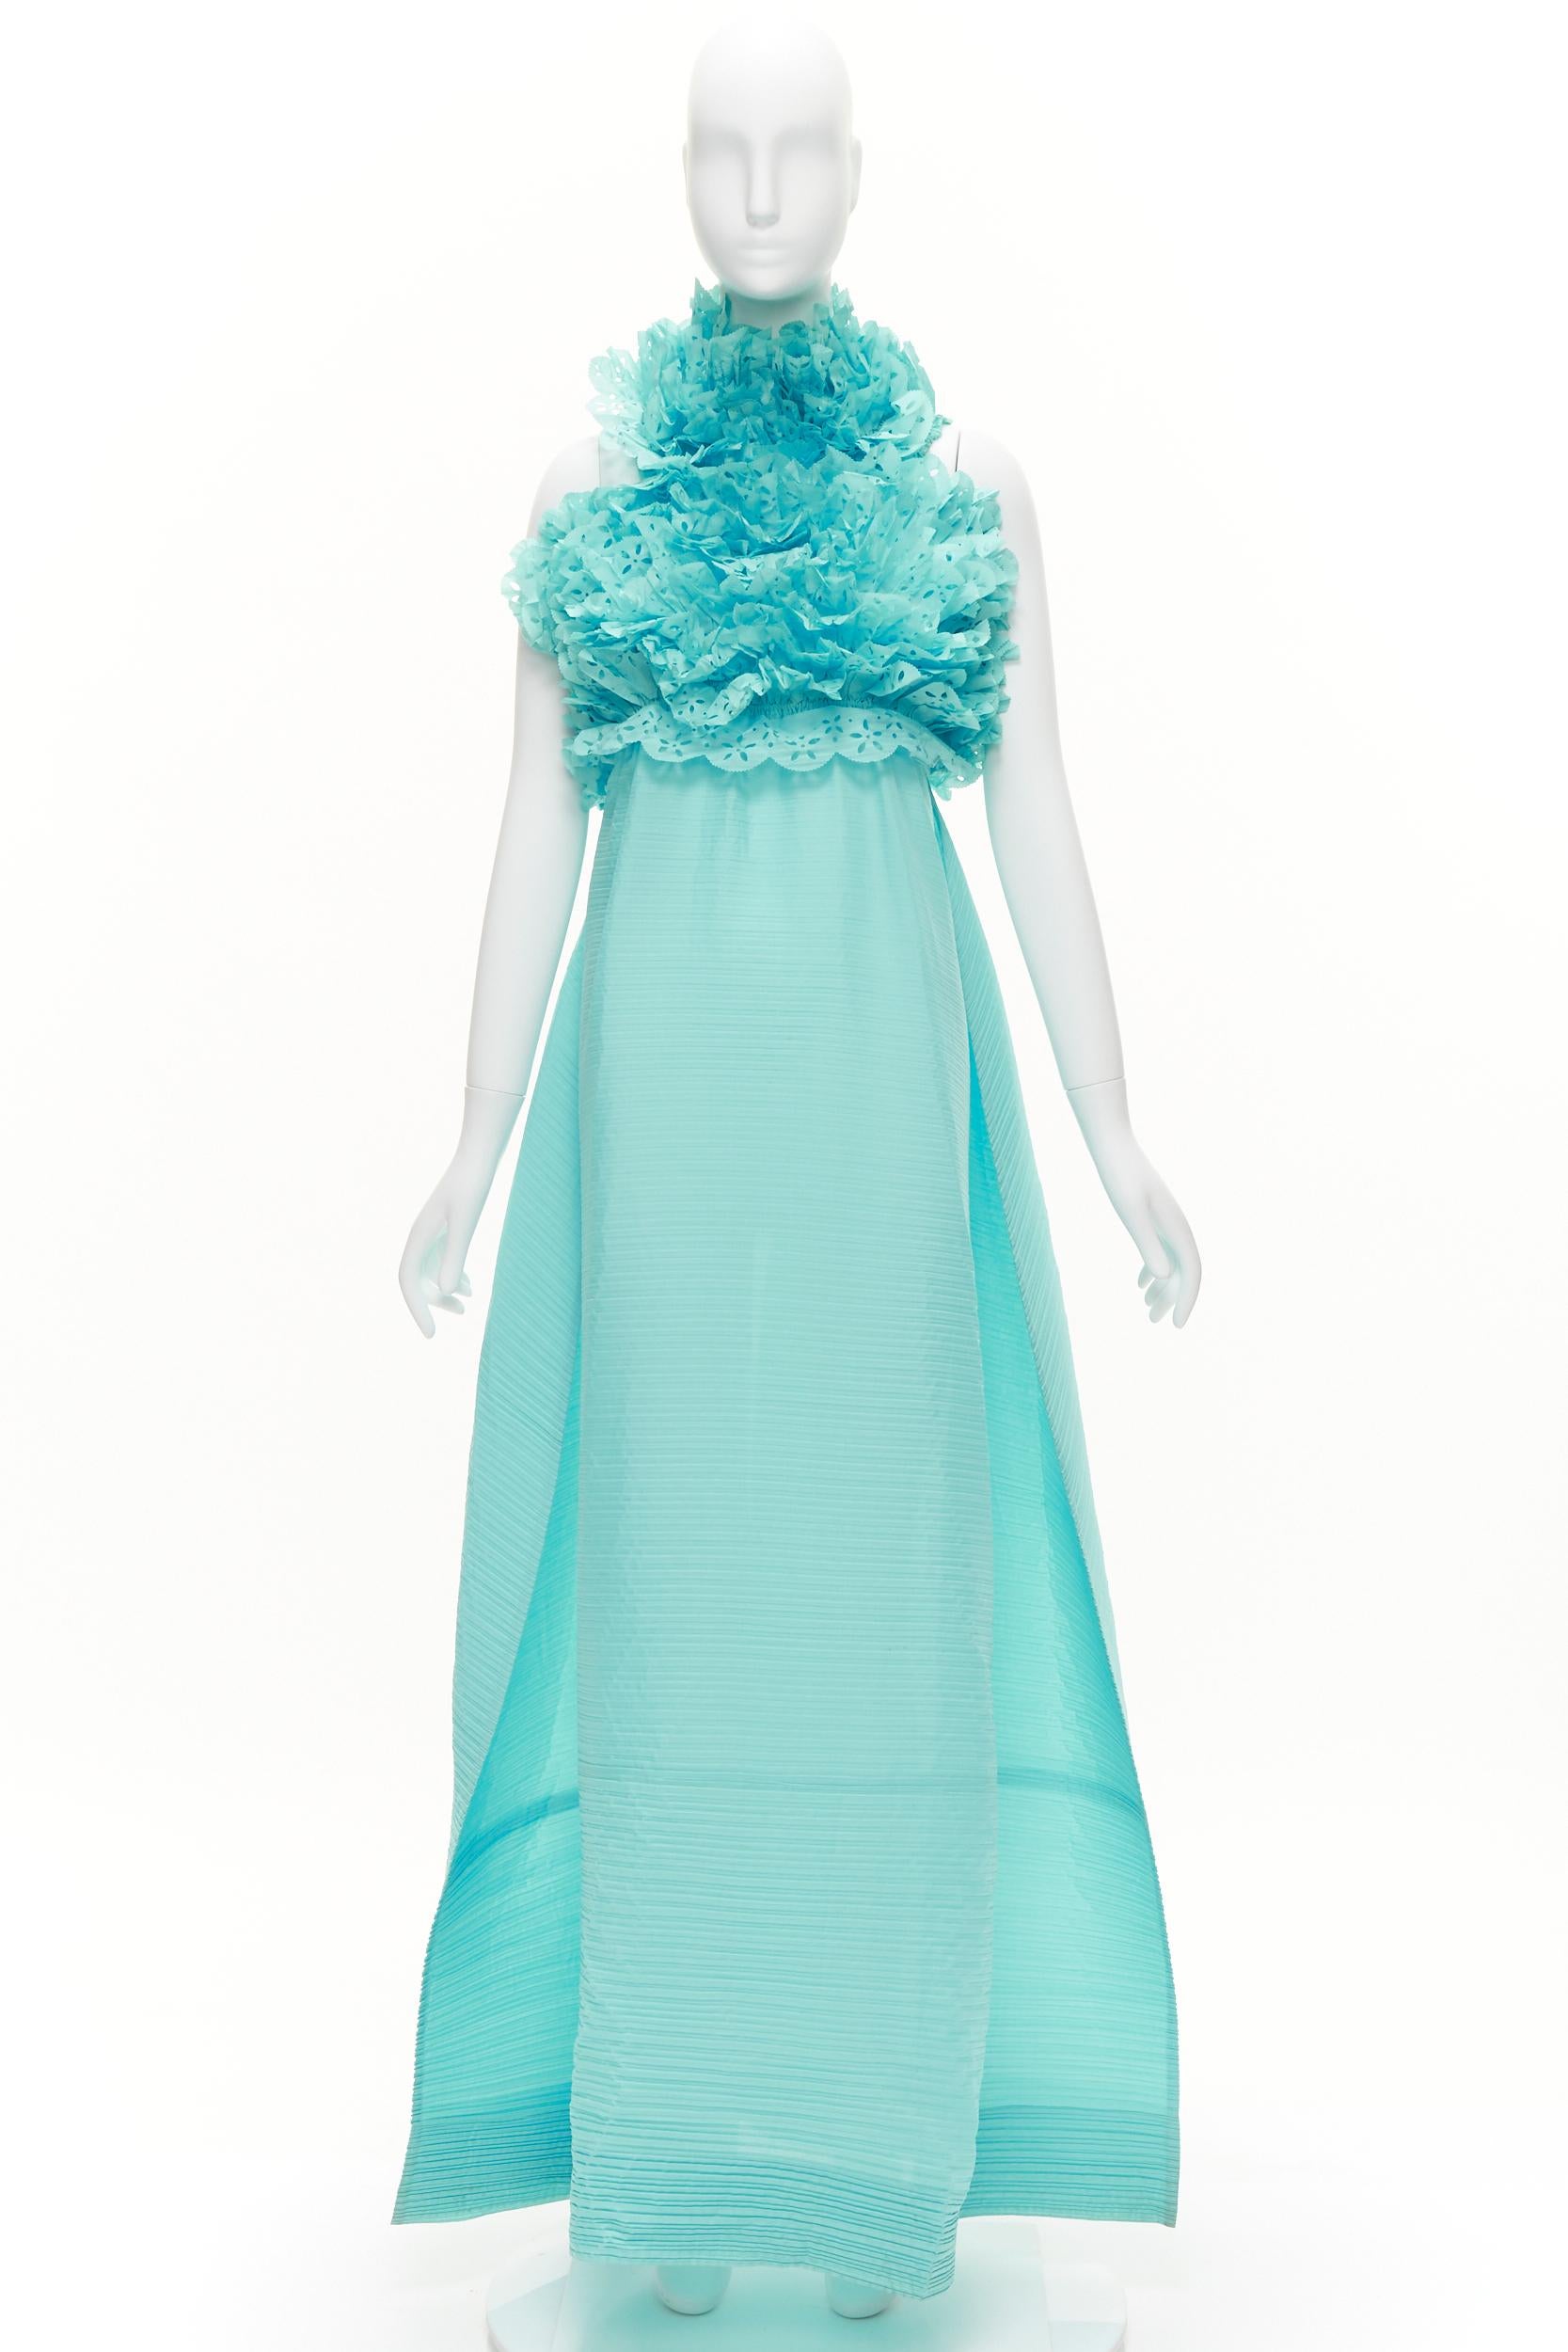 rare ISSEY MIYAKE sky blue laser cut ruffle high neck evening gown dress M For Sale 8